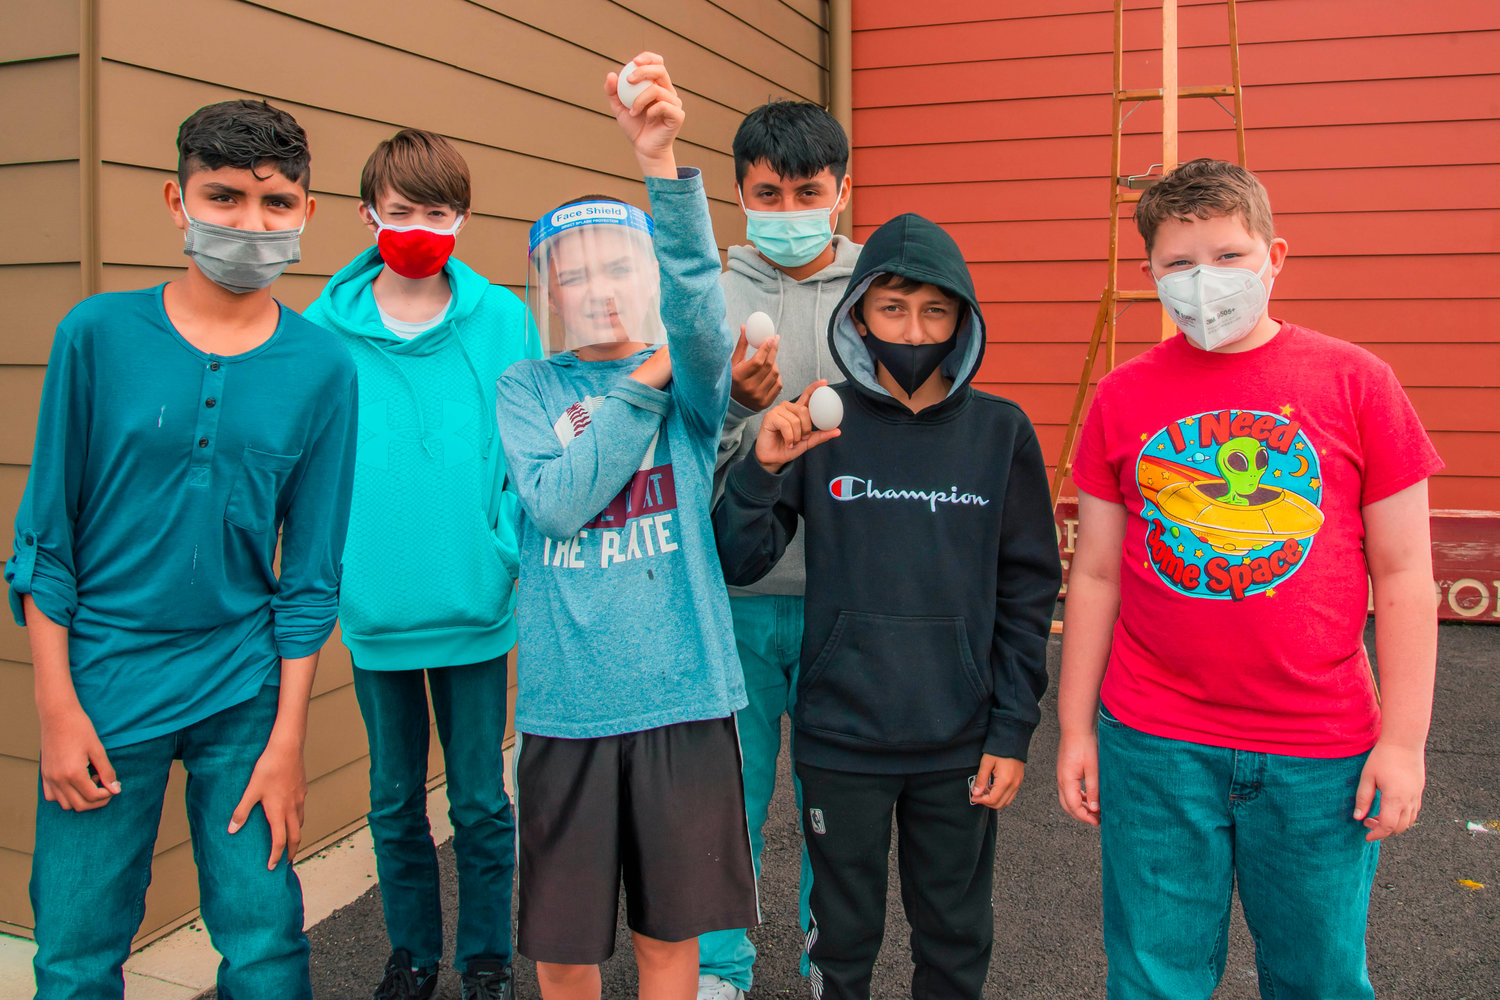 Javier Cervantes, Roman David, Timothy Brossard, Alexander Cruz, Evan Tackman and Matthew Burns, sixth-graders in the Summer School program at Fords Prairie Elementary School, pose for a photo with surviving eggs during a science project Thursday in Centralia .